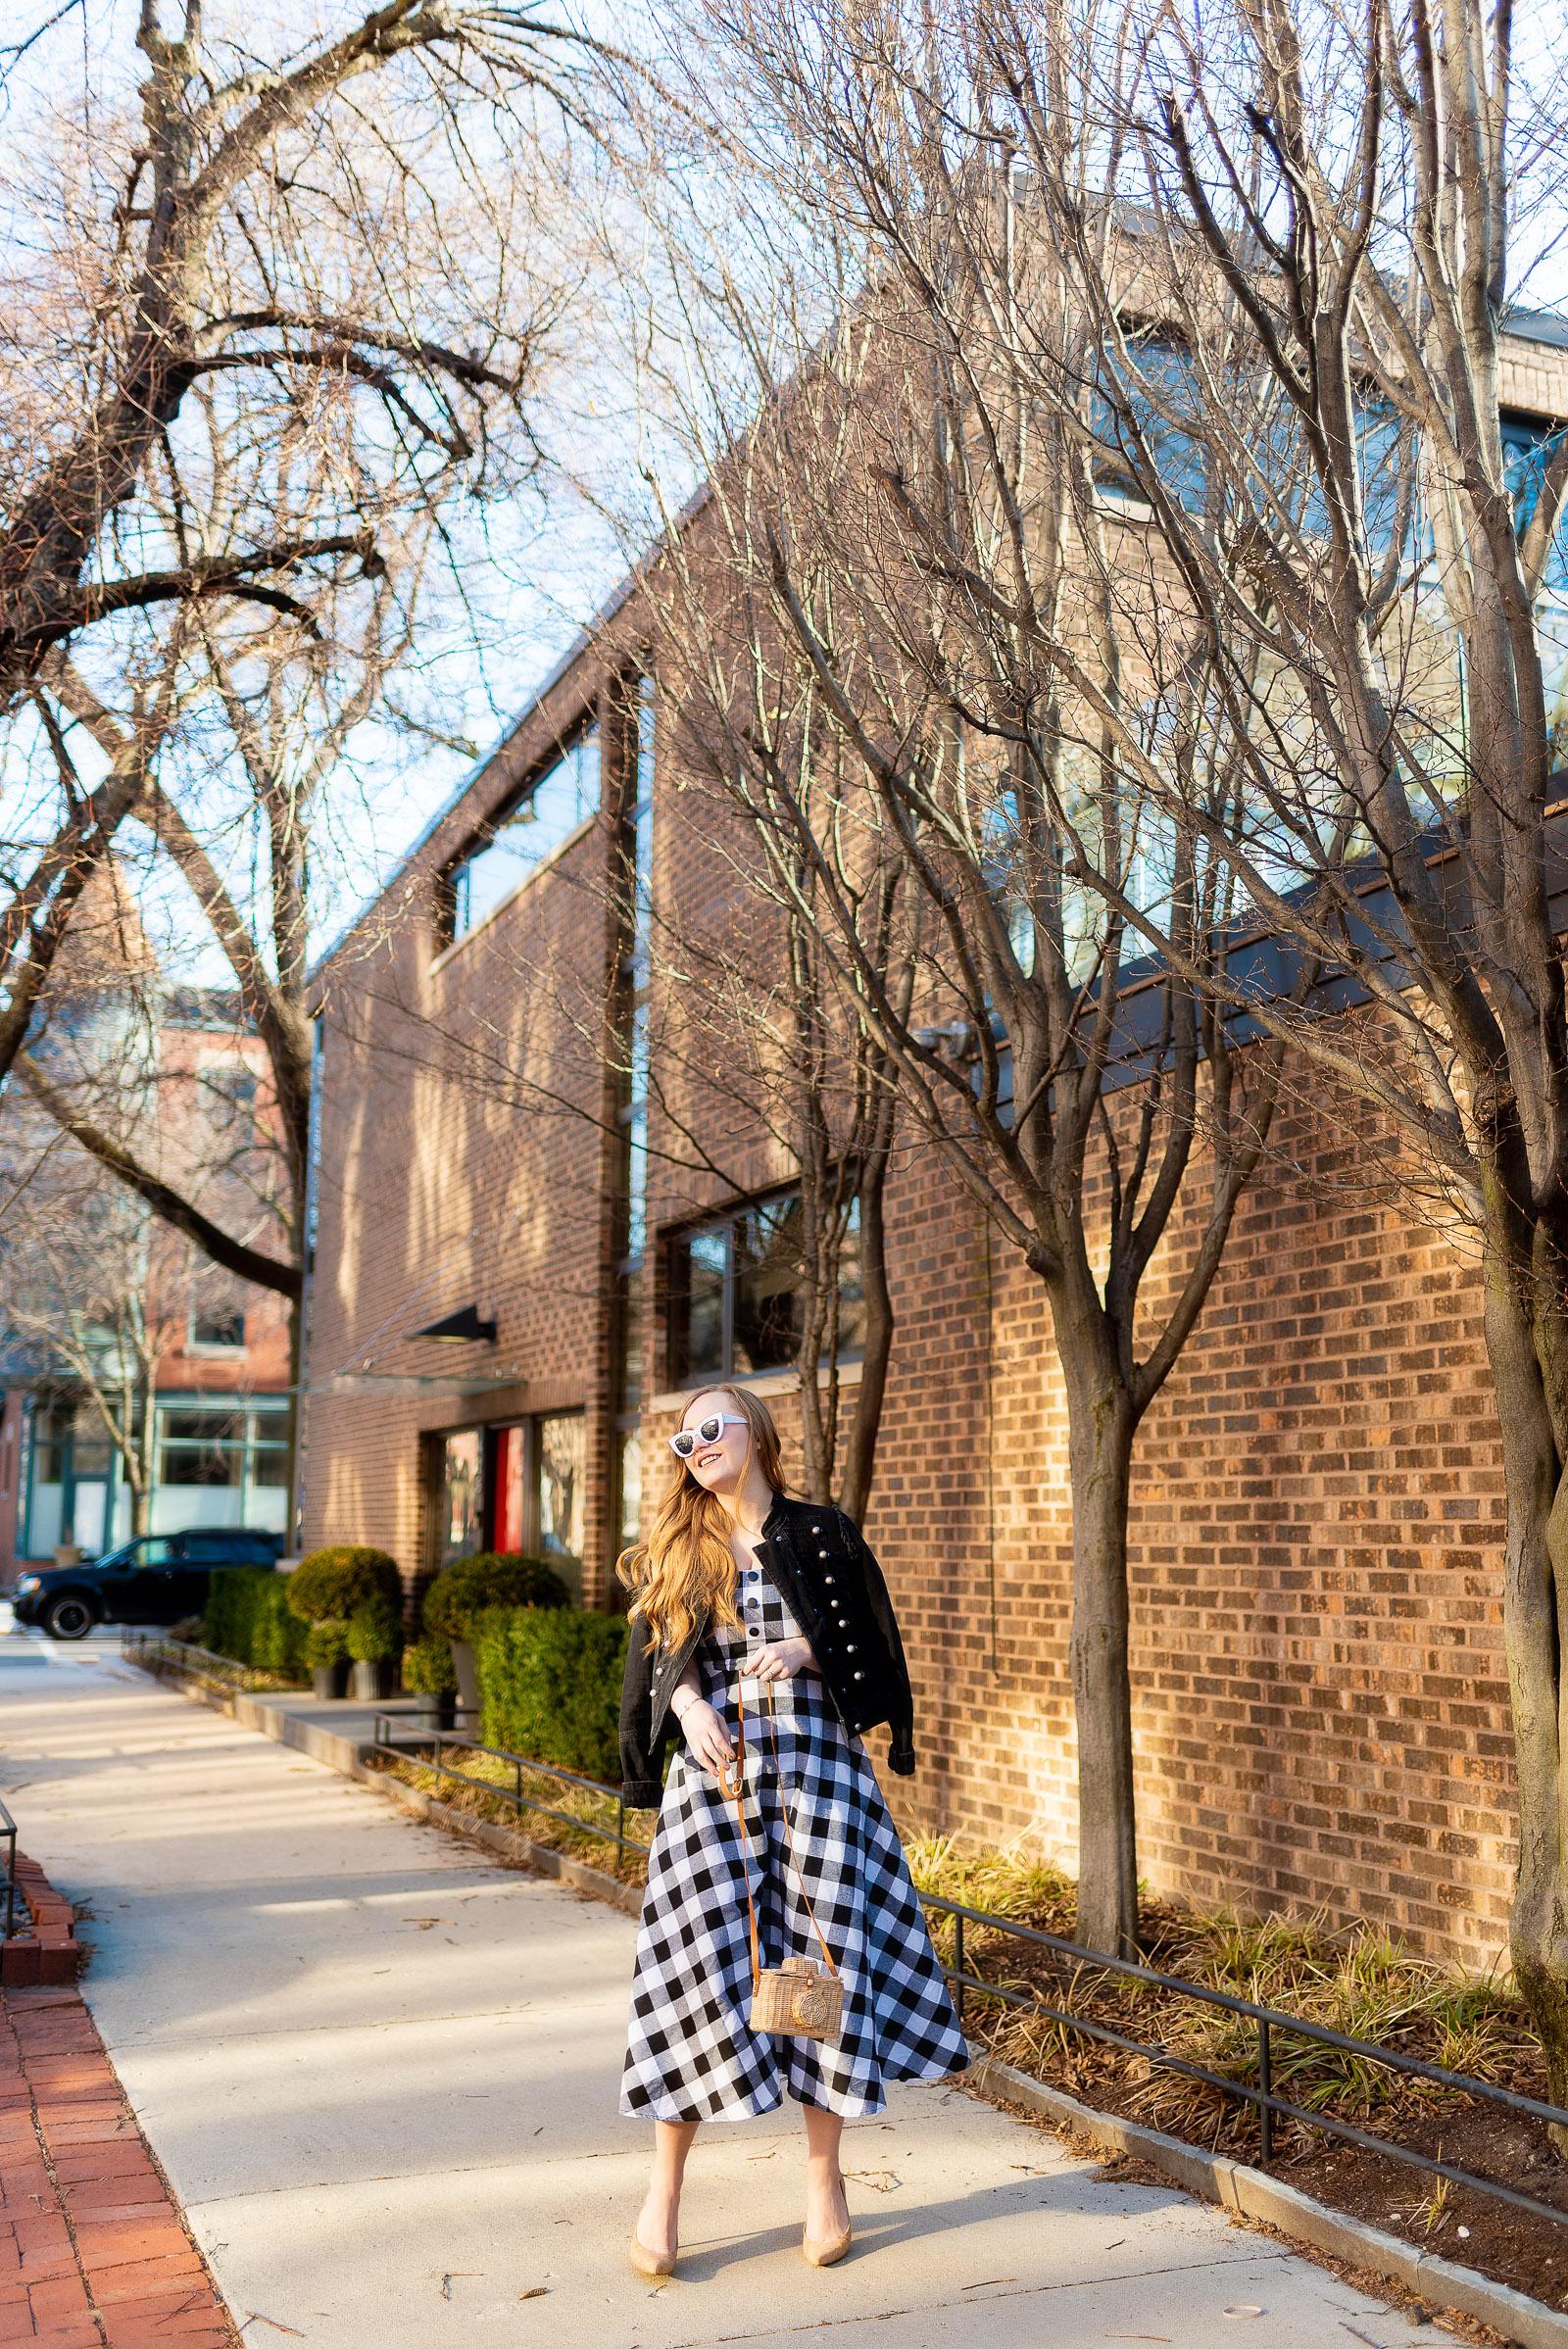 Black Gingham Spring Outfit